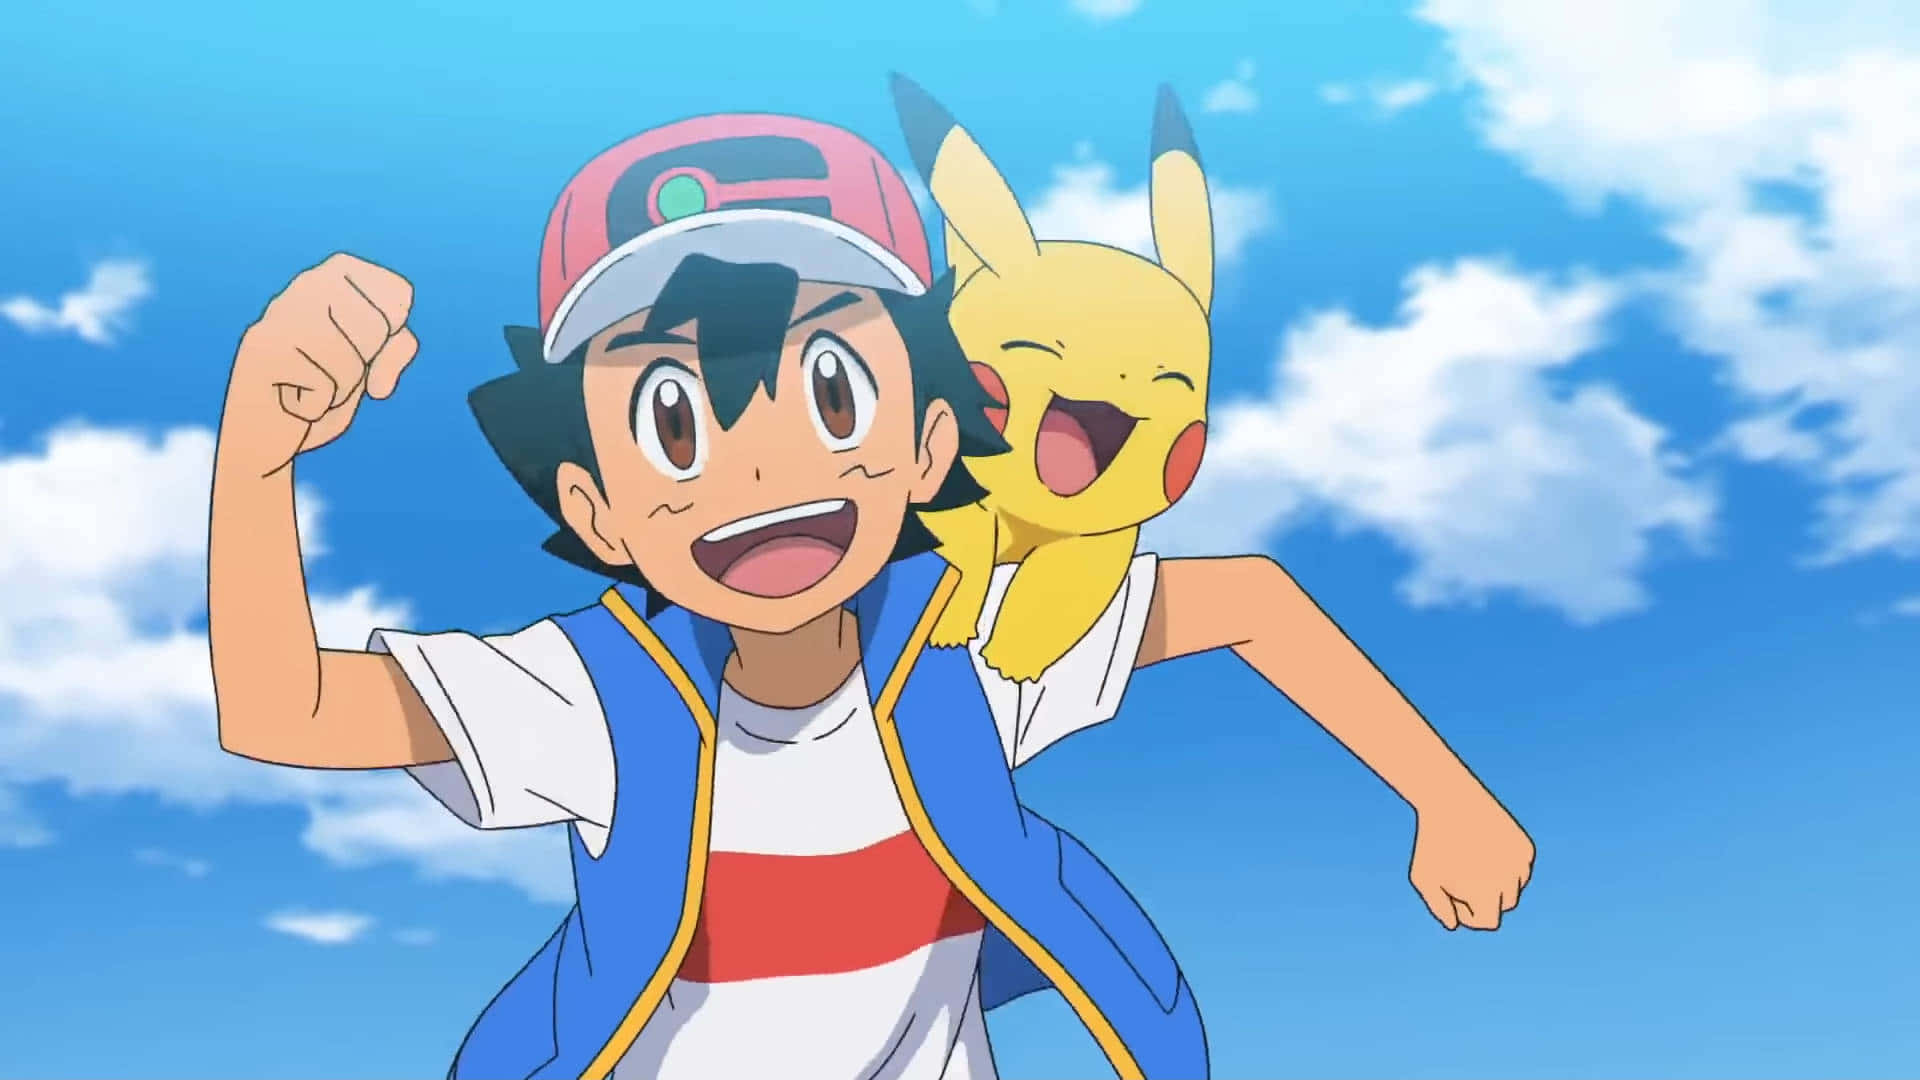 The Dynamic Duo - Ash and Pikachu Wallpaper